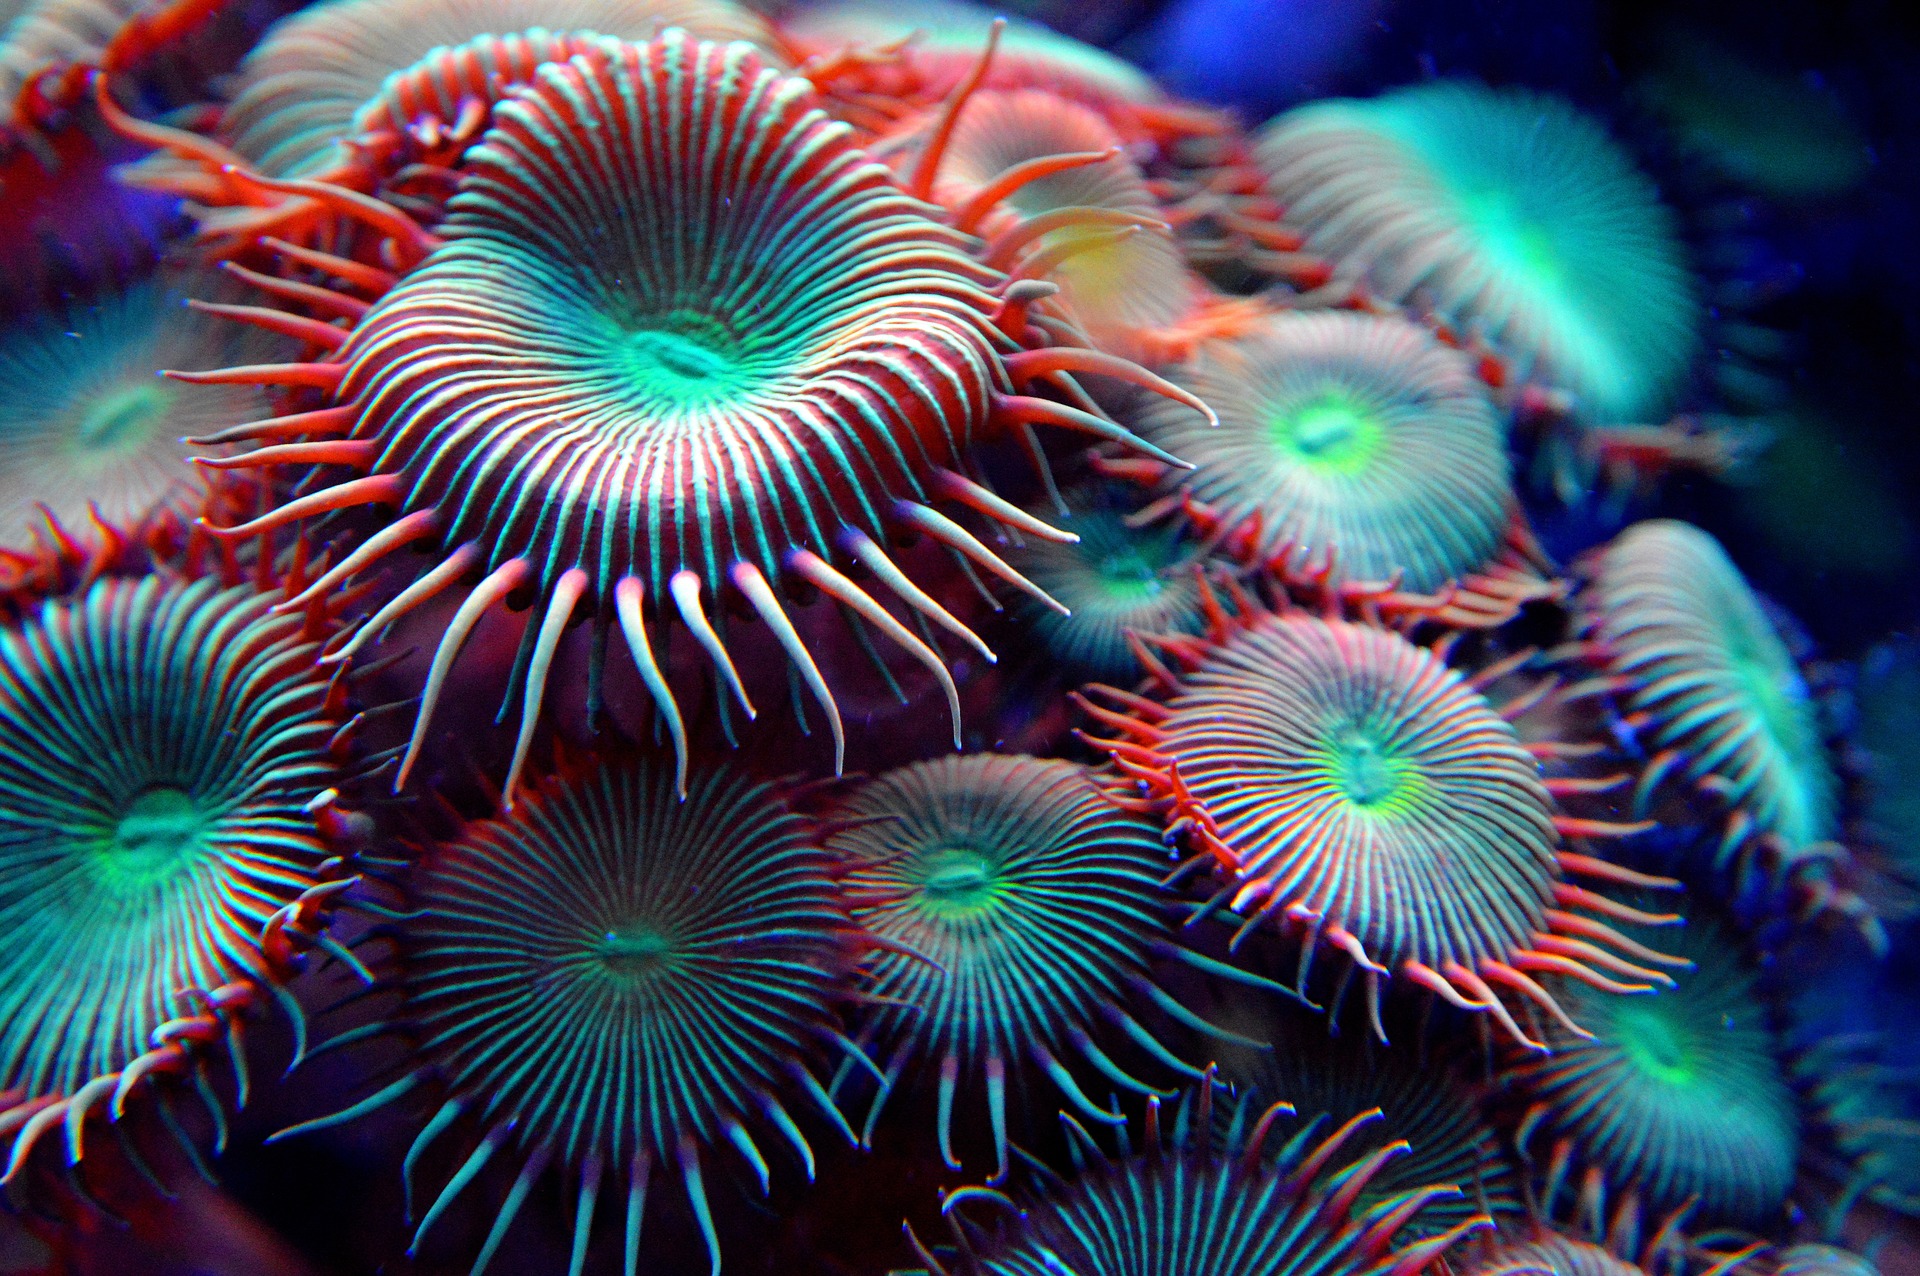 40 Shocking Sea Anemone Facts About the Flowers of the Sea 